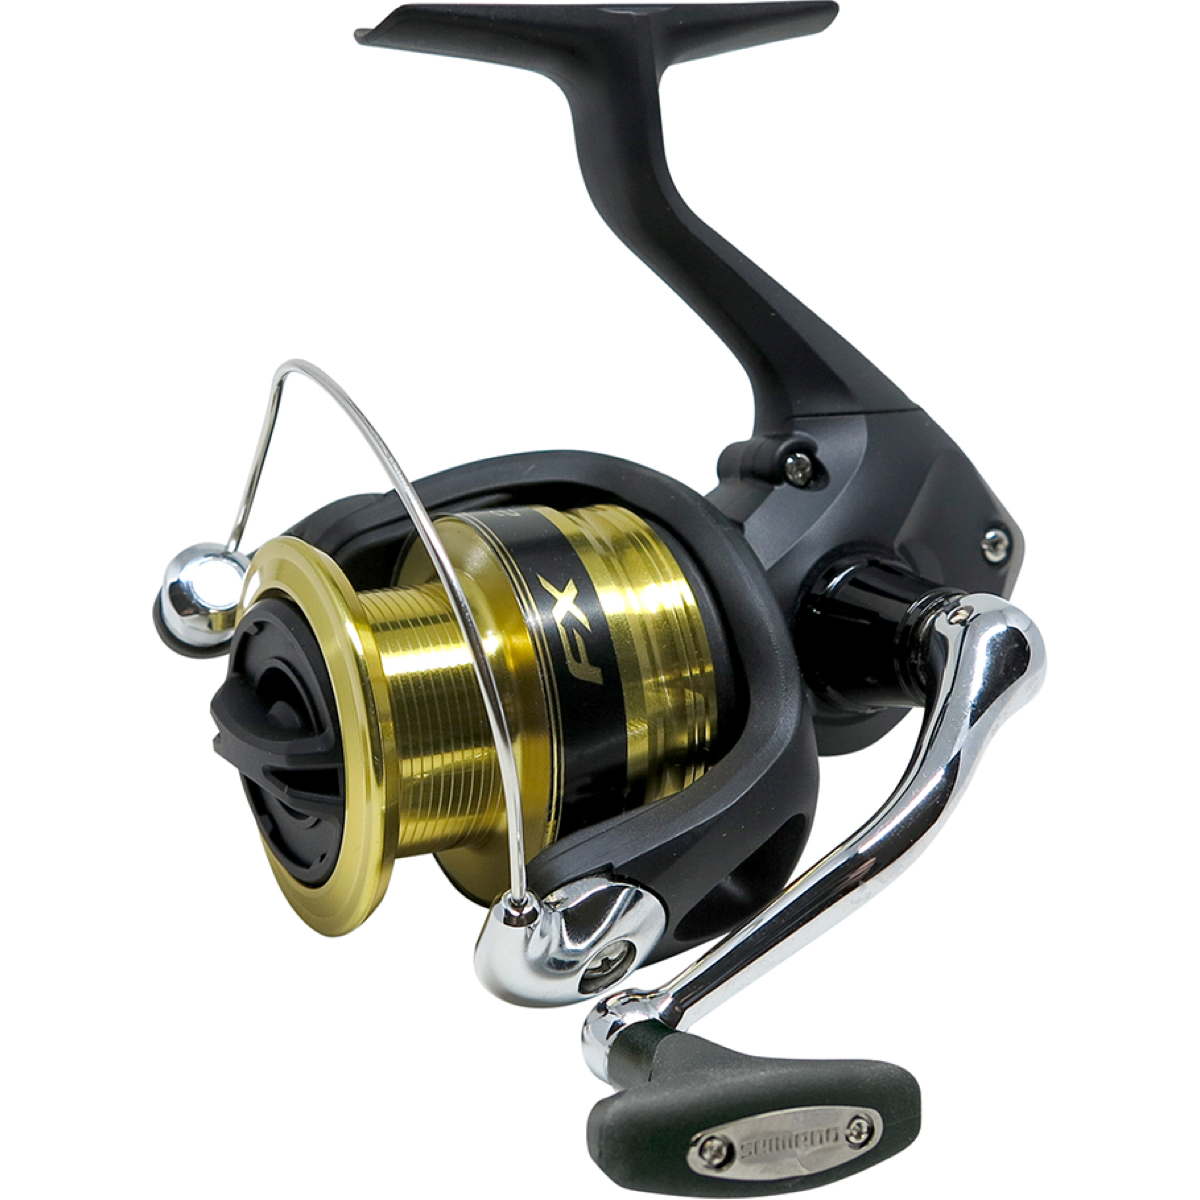 Photo of Shimano FX FC Spinning Reel for sale at United Tackle Shops.